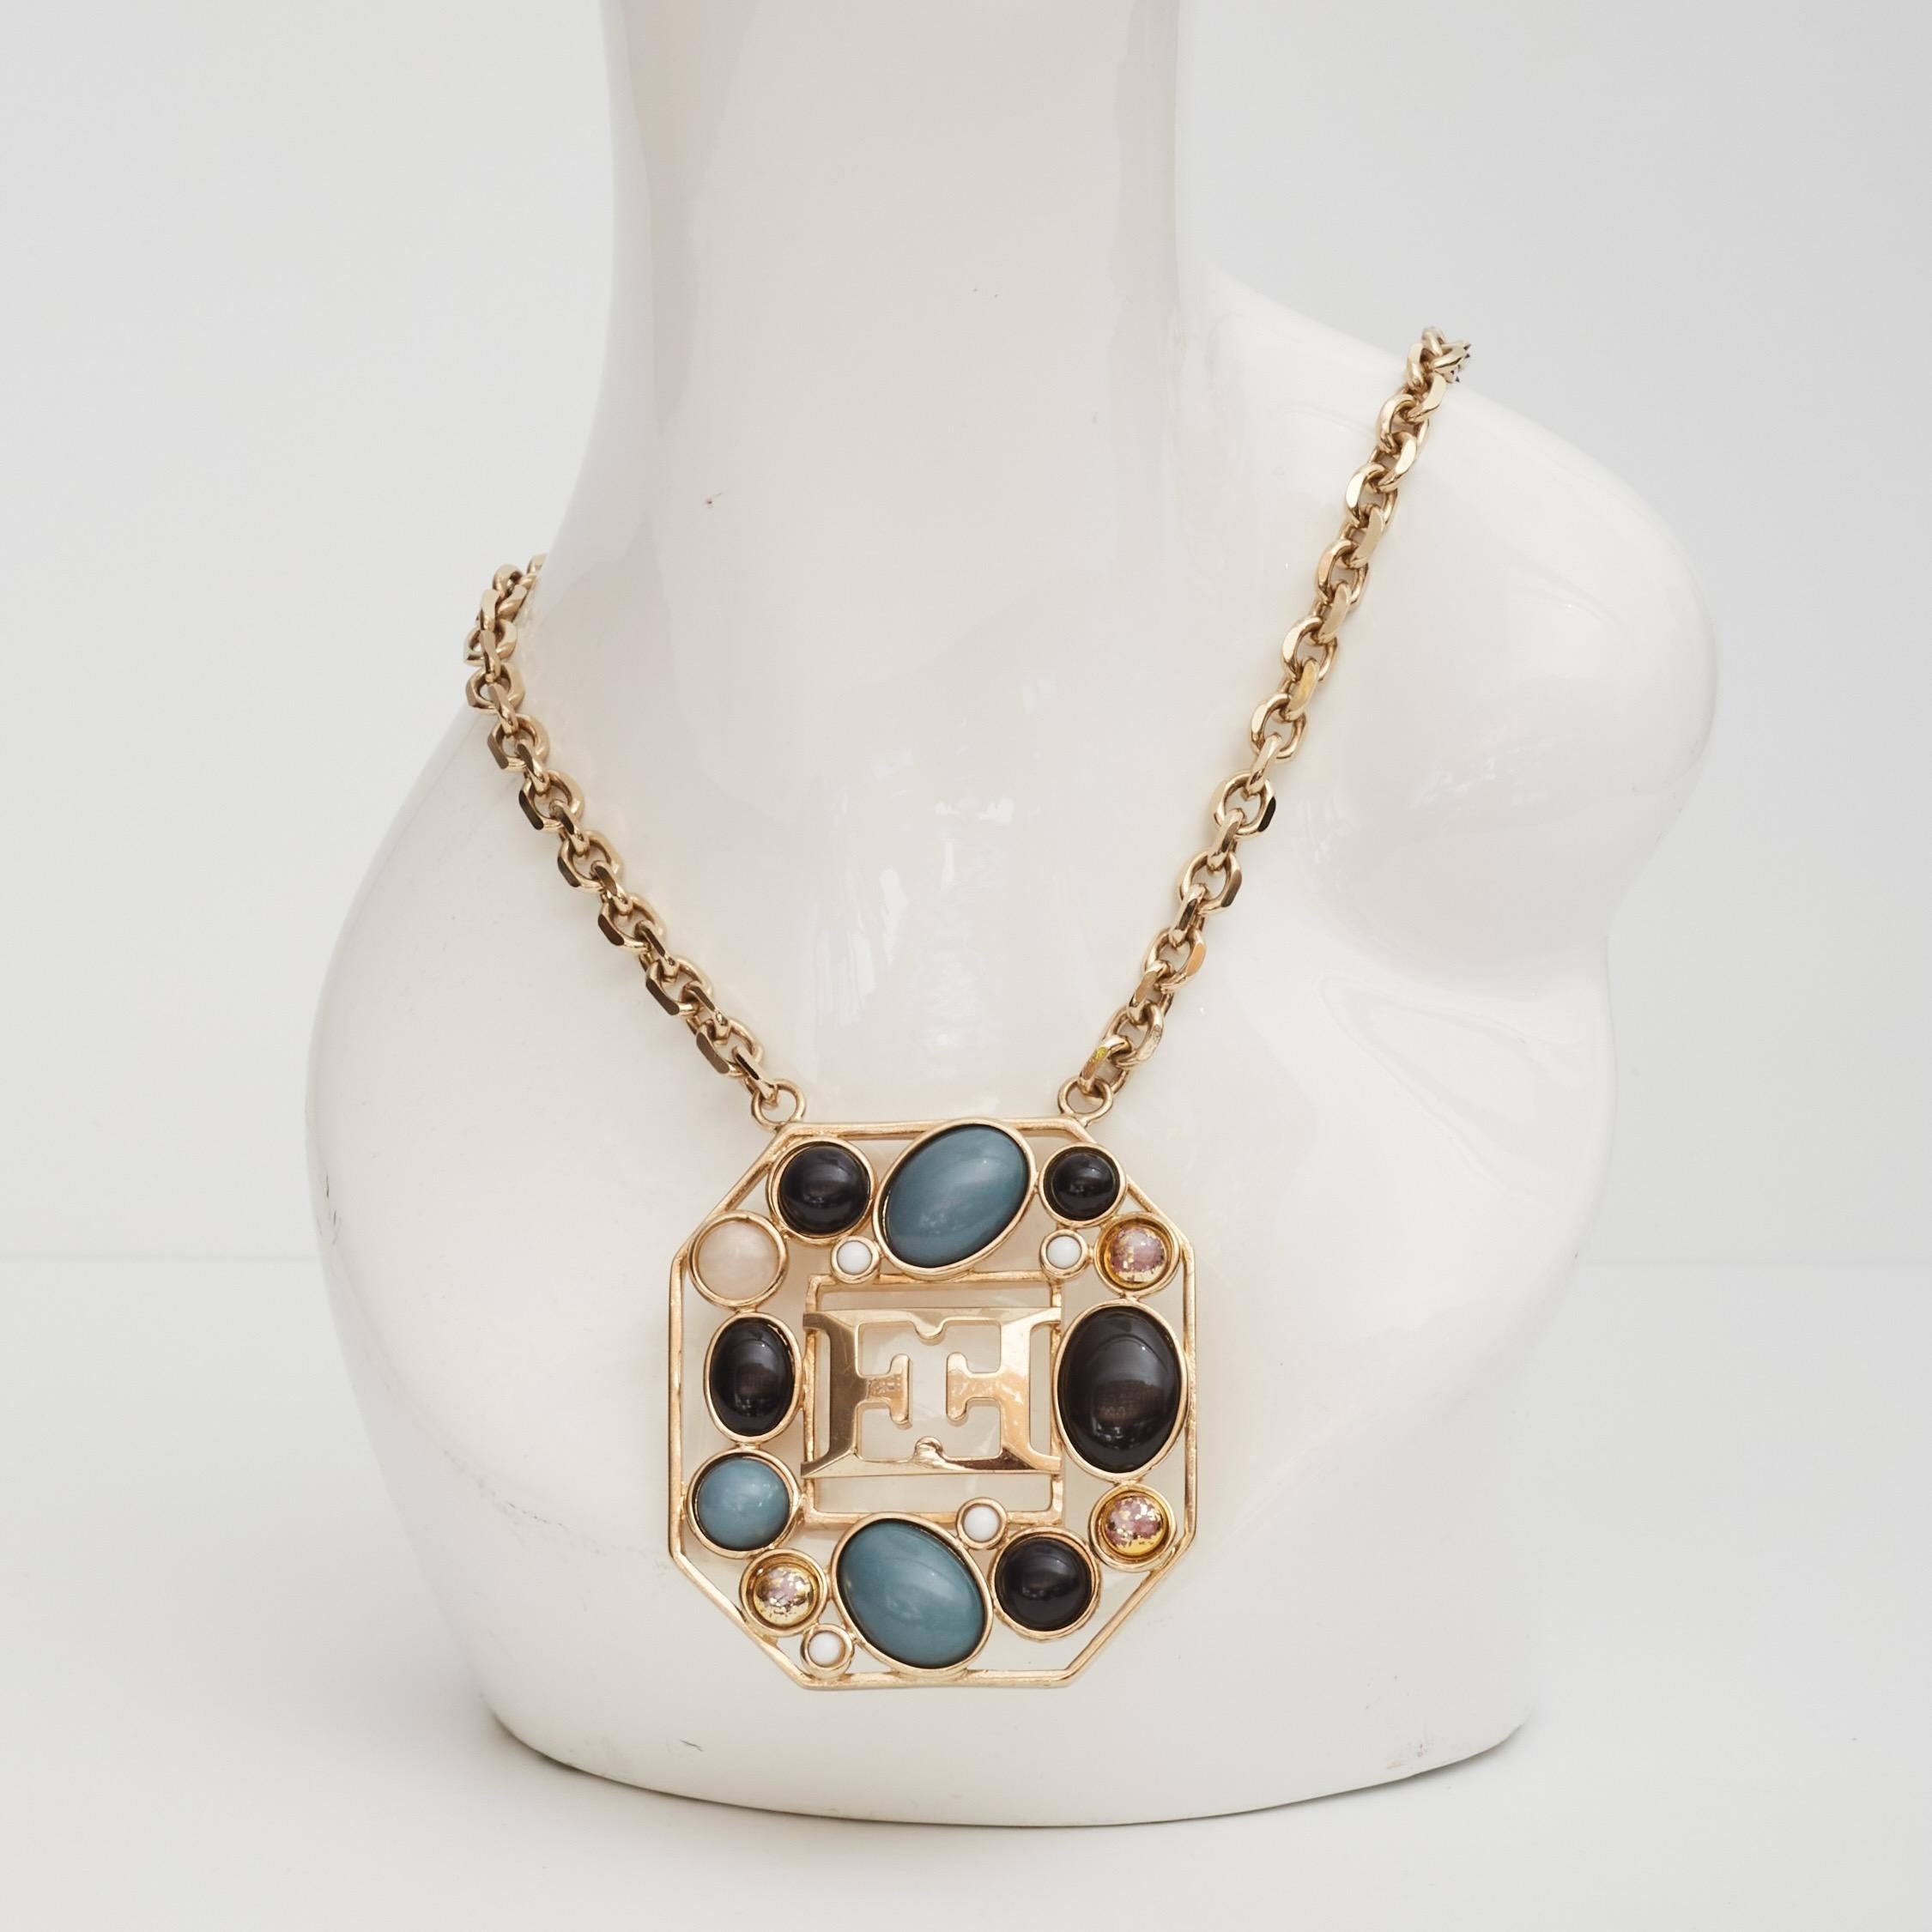 Color: Gold tone chain. Gold pendant with white, turquoise & black glass embellishments
Material: metal and glass
Year: Circa 2000s

Measures:
Chain 34”
Pendant drop: 3.5” x 3”

Comes with: Leather box
Condition: Very good. Light scratches to